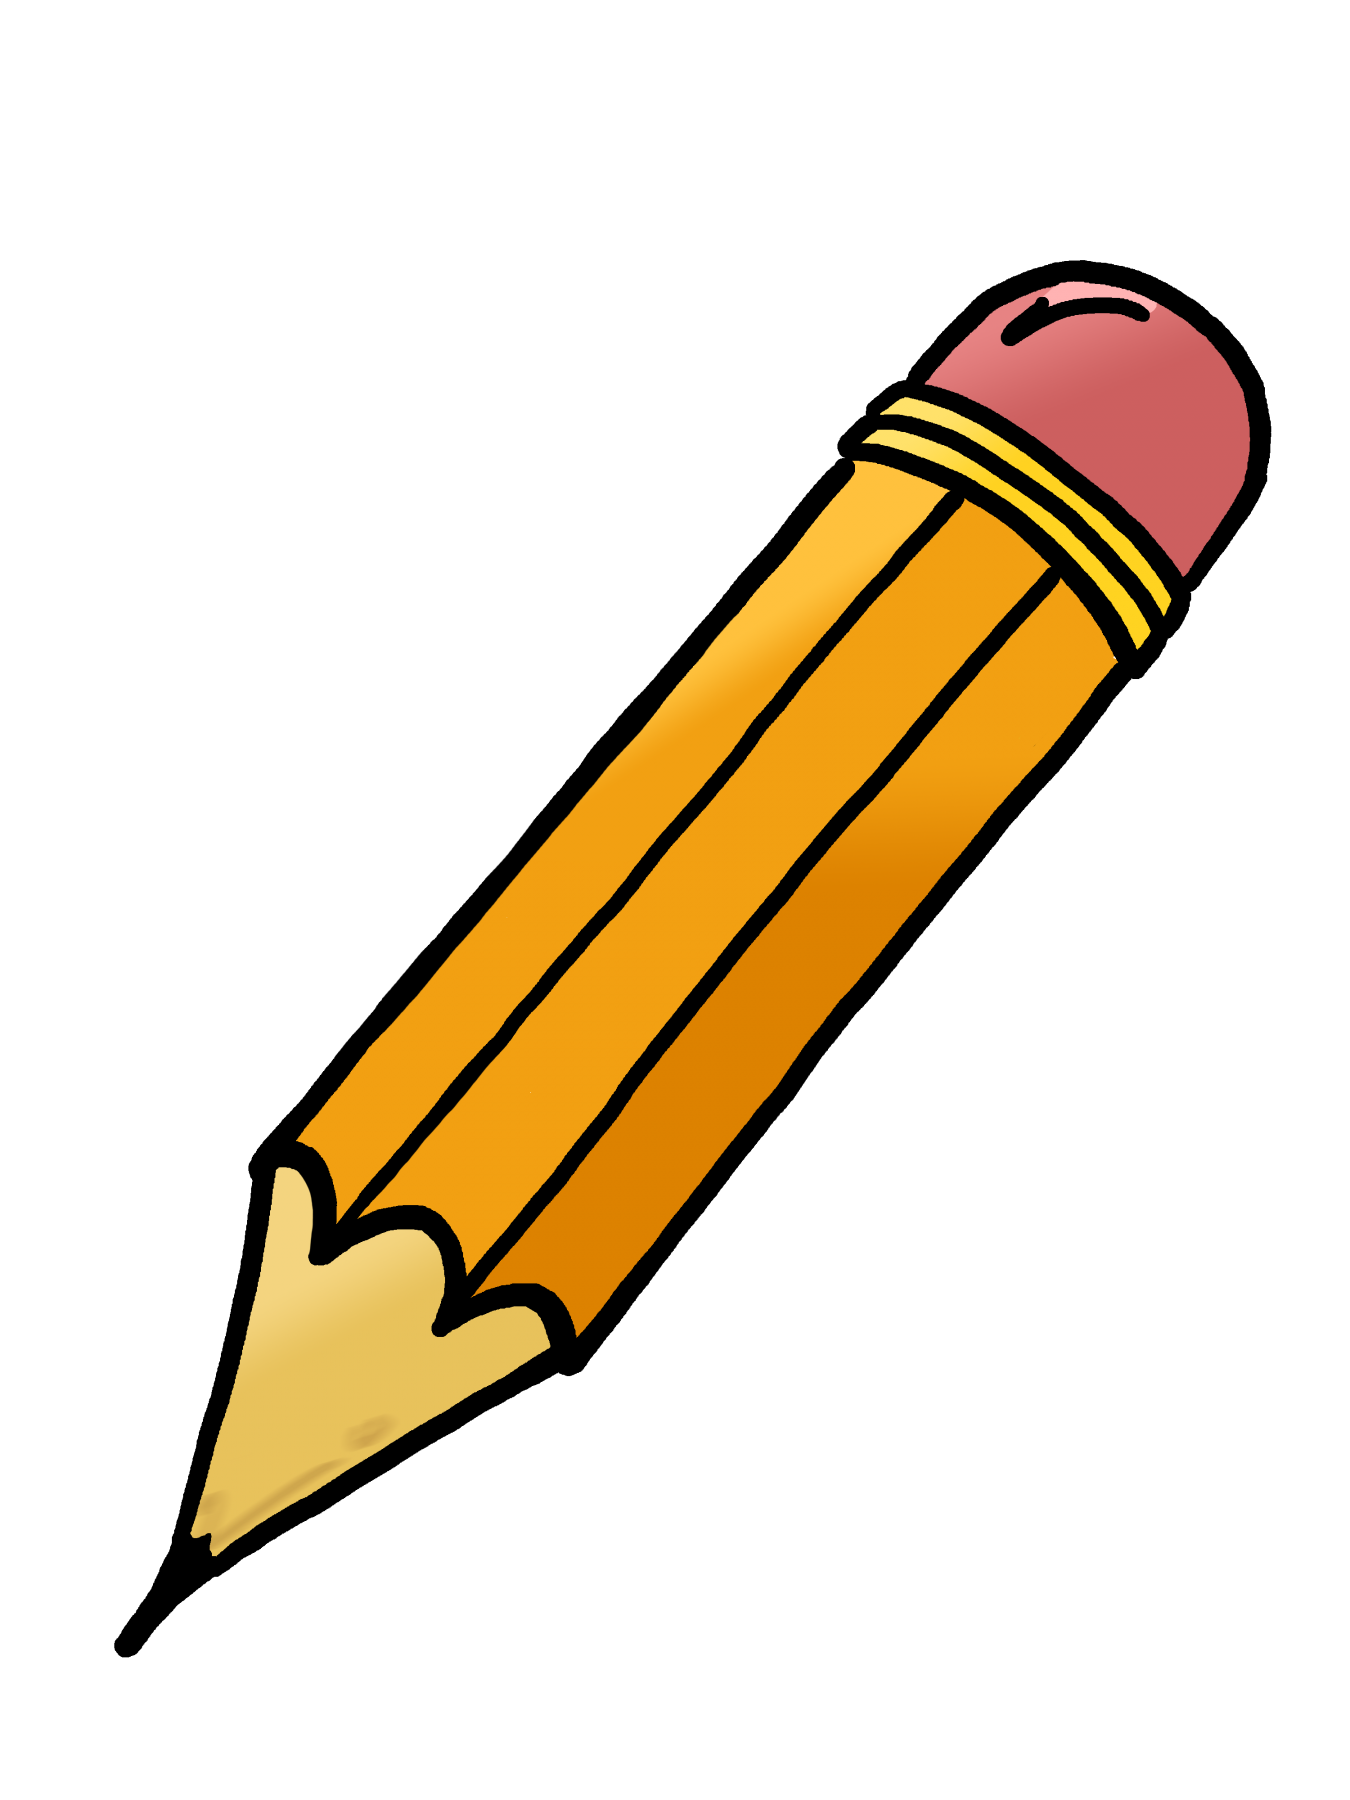 Pencil images free google. Clipart hammer pillow